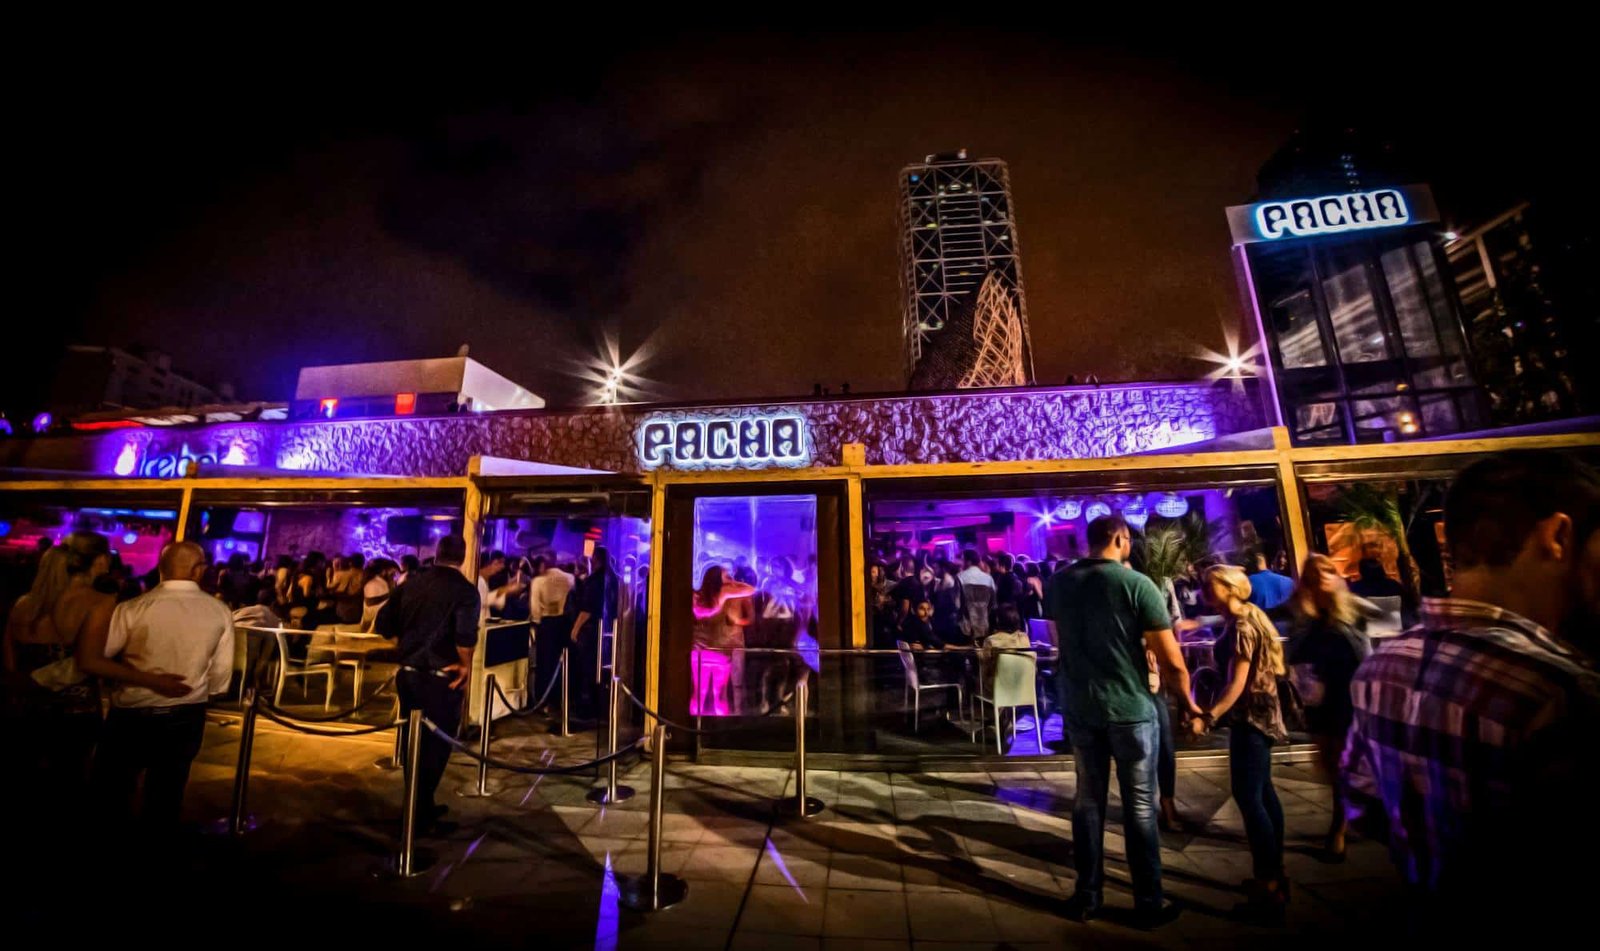 Where to Party in Barcelona,Barcelona parties and nightlife